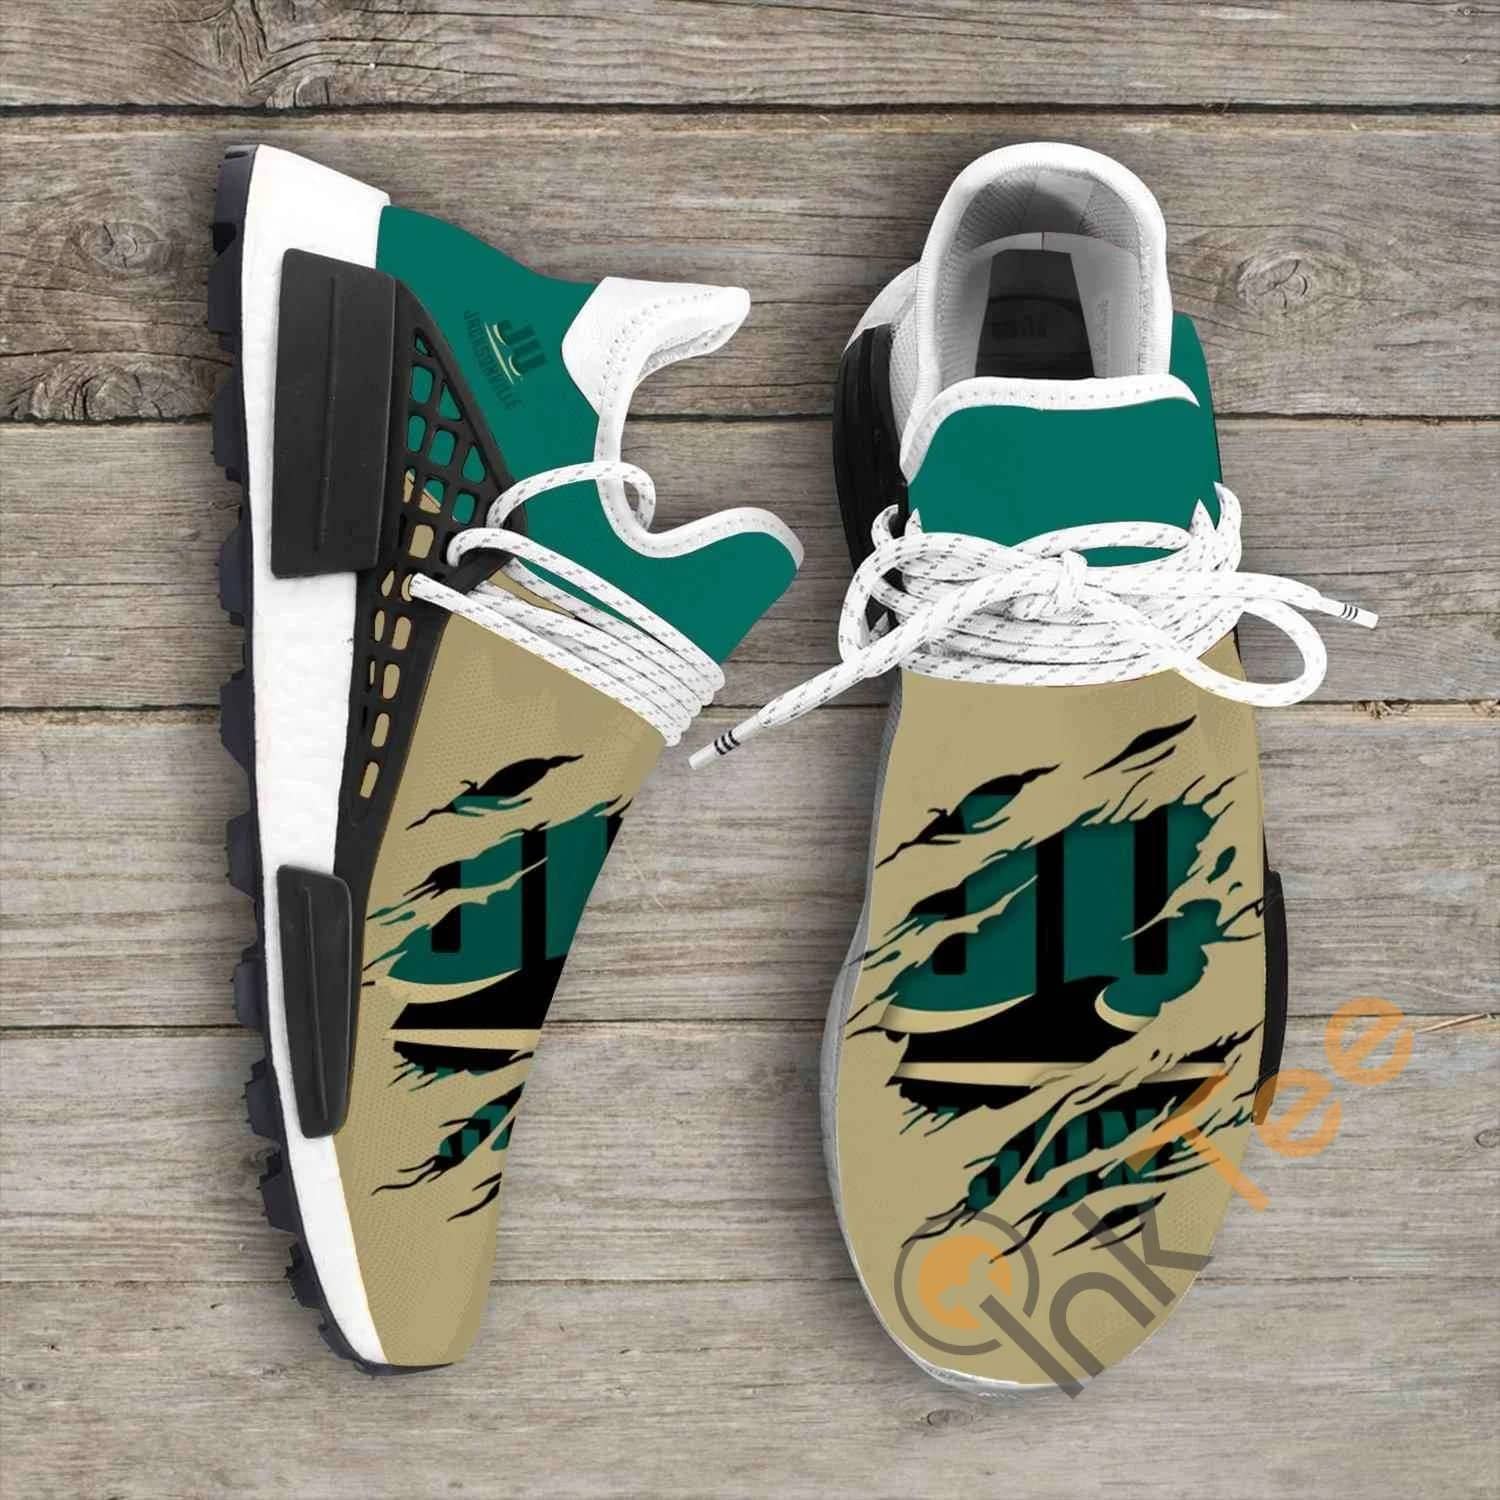 Jacksonville Dolphins Ncaa Nmd Human Shoes